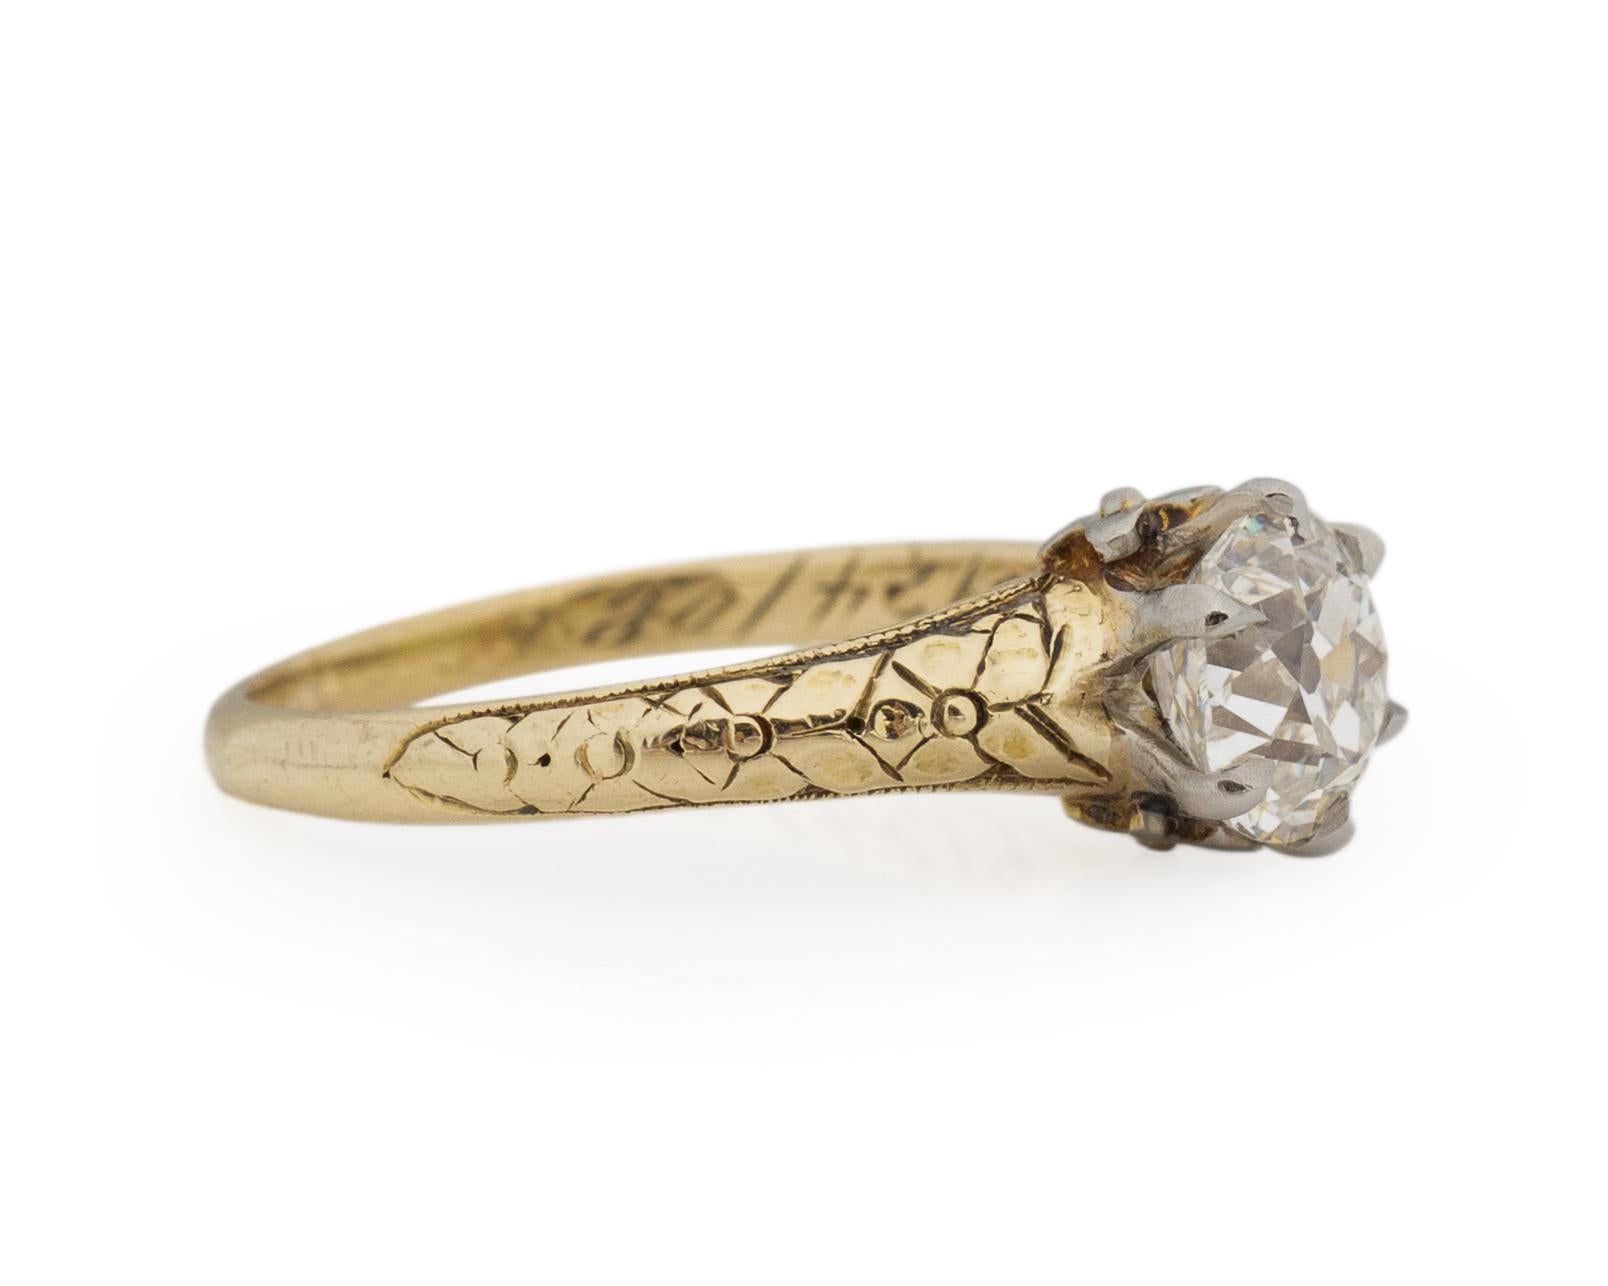 Ring Size: 4.5
Metal Type: 14k Yellow Gold [Hallmarked, and Tested]
Weight: 2.6 grams
Engravings: 6/24/08

Center Diamond Details:
GIA REPORT #: 6223195959
Weight: 1.00ct
Cut: Old European brilliant
Color: I
Clarity: SI2
Measurements: 6.06mm x